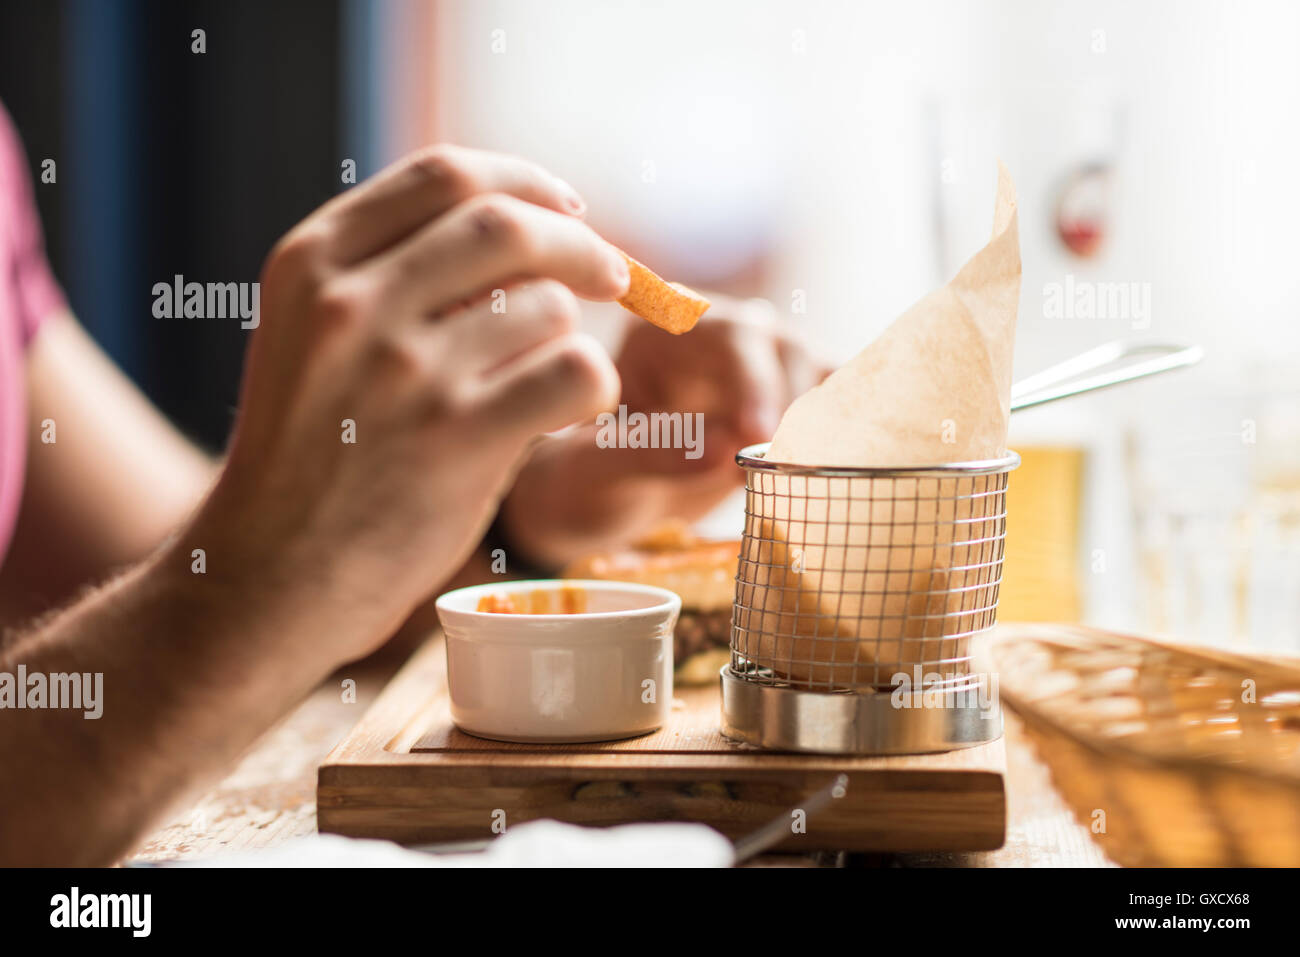 Hand of young man eating chips in restaurant Stock Photo